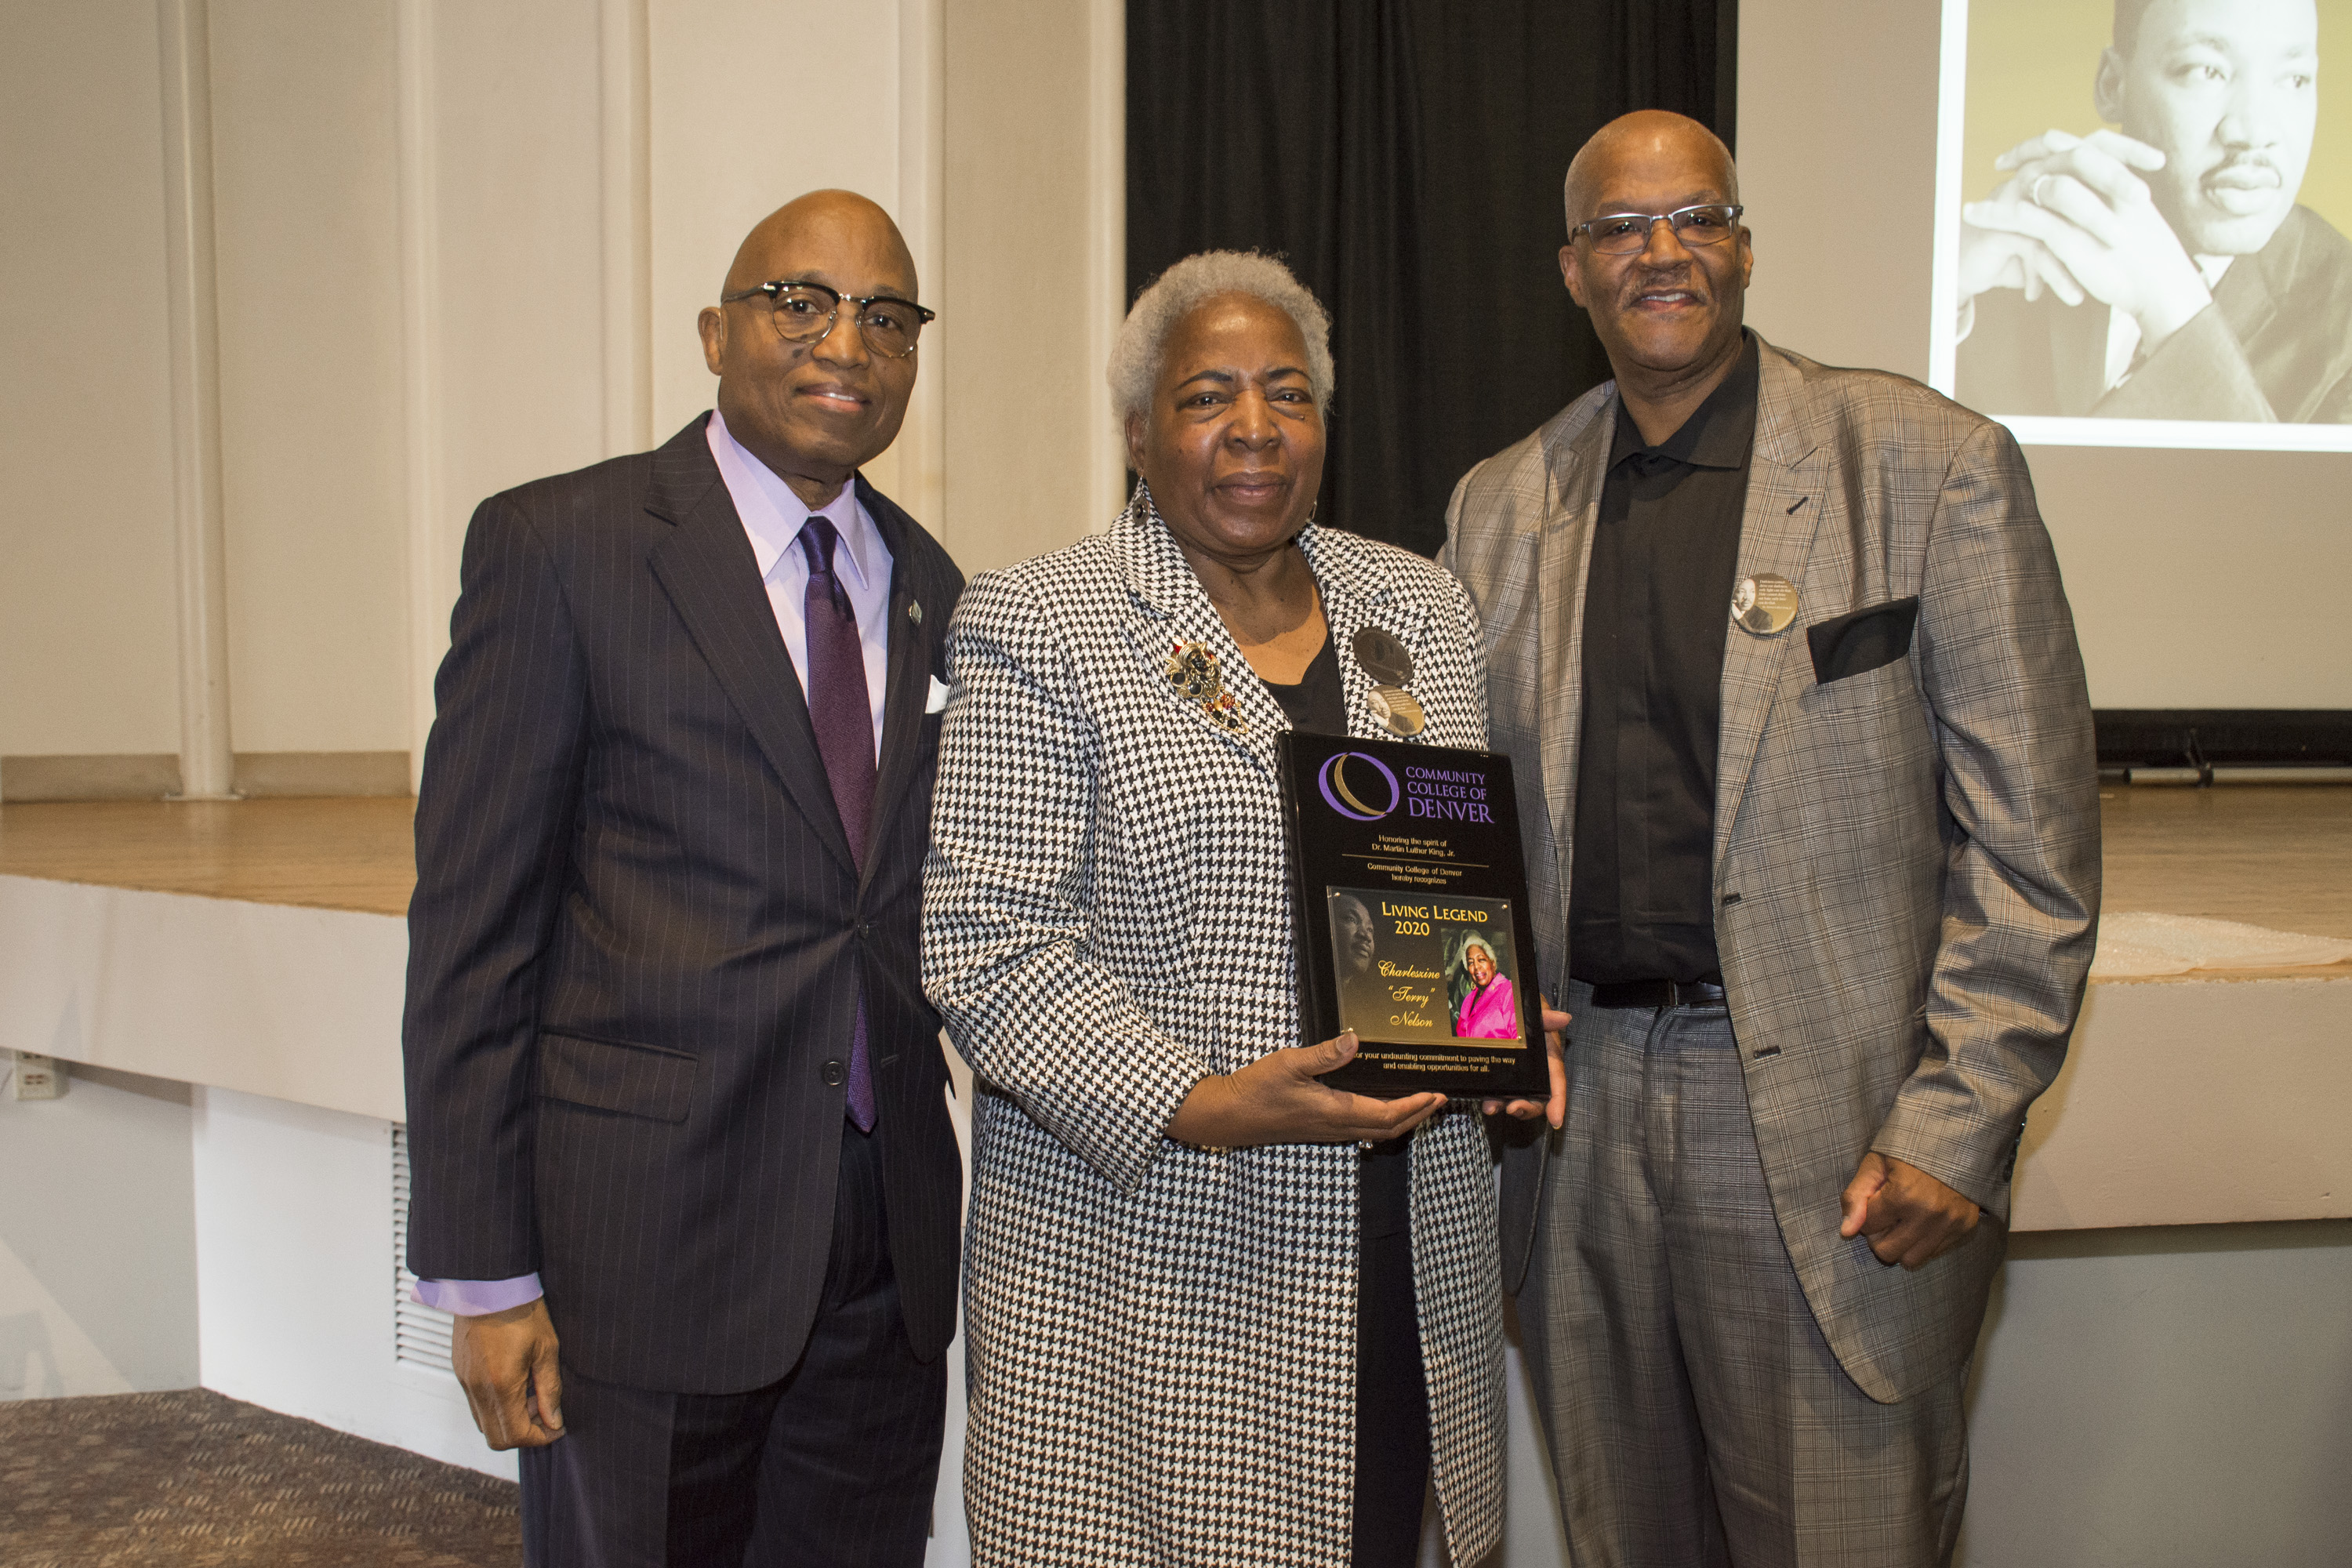 Living Legend award recepient Terry Nelson with Everette Freeman and Kevin Williams